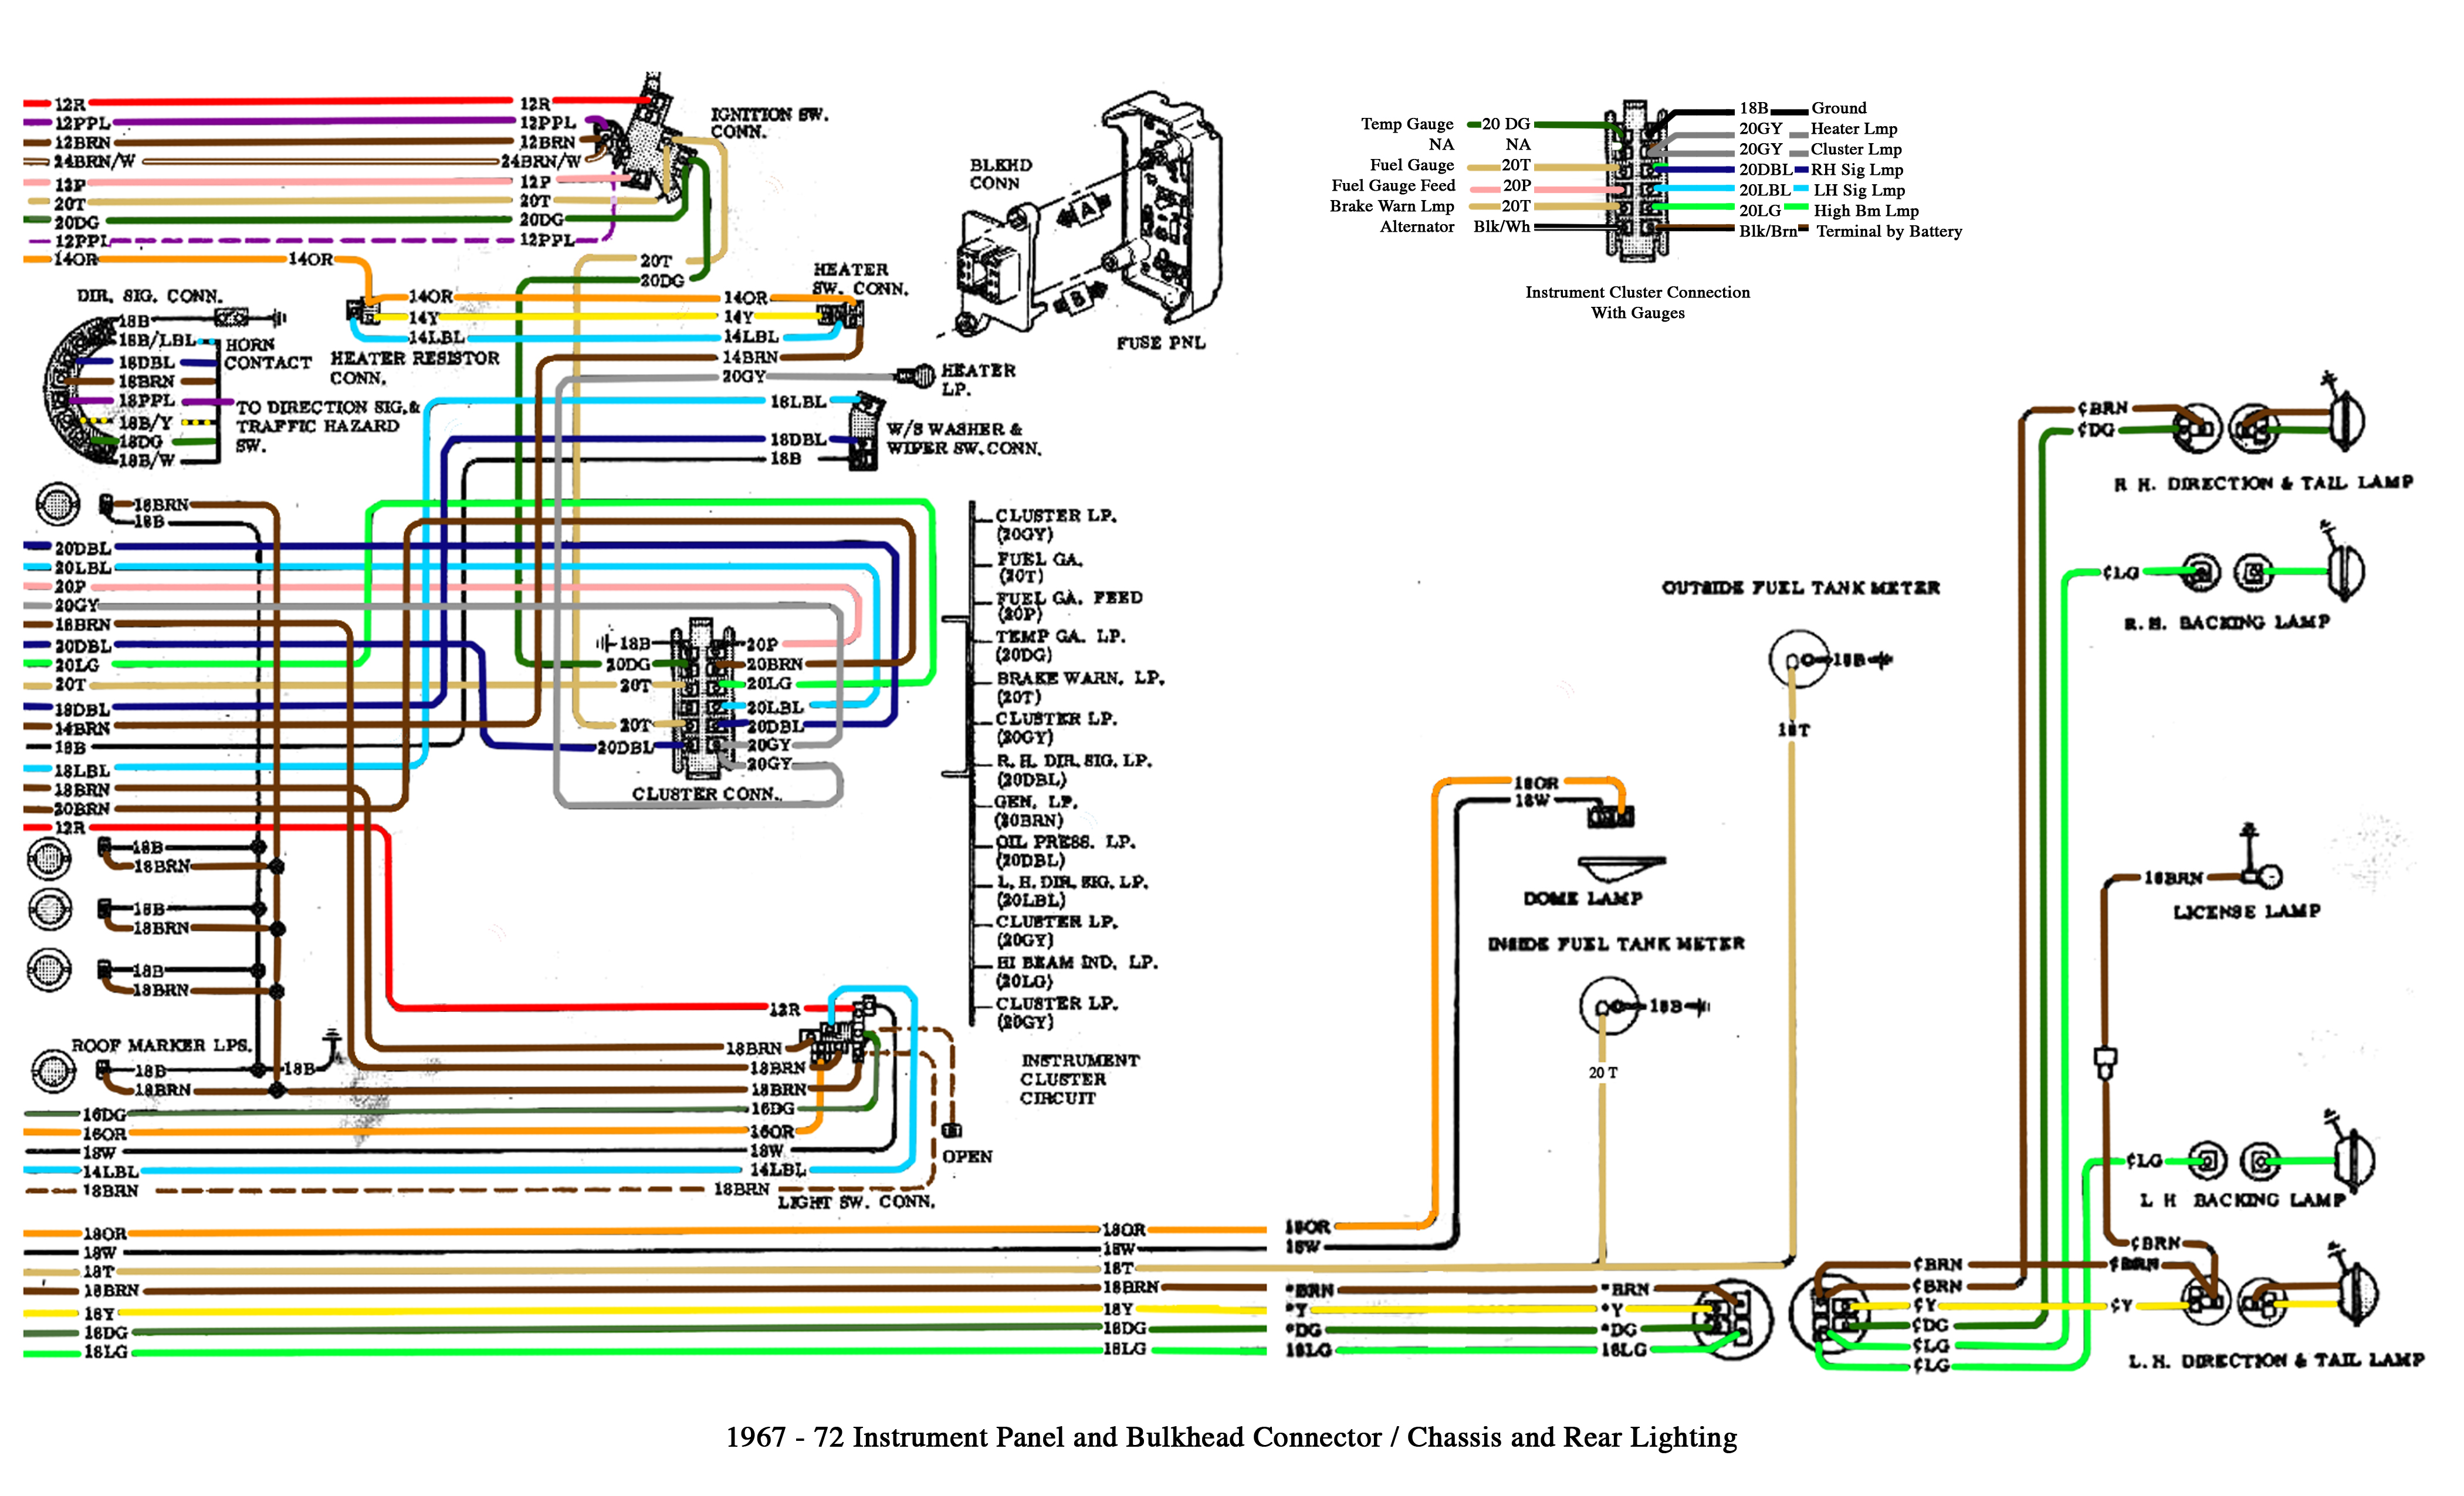 Color Wiring Diagram FINISHED - The 1947 - Present Chevrolet & GMC Truck  Message Board Network 95 Chevy Silverado Wiring Diagram 67-72 Chevy Trucks